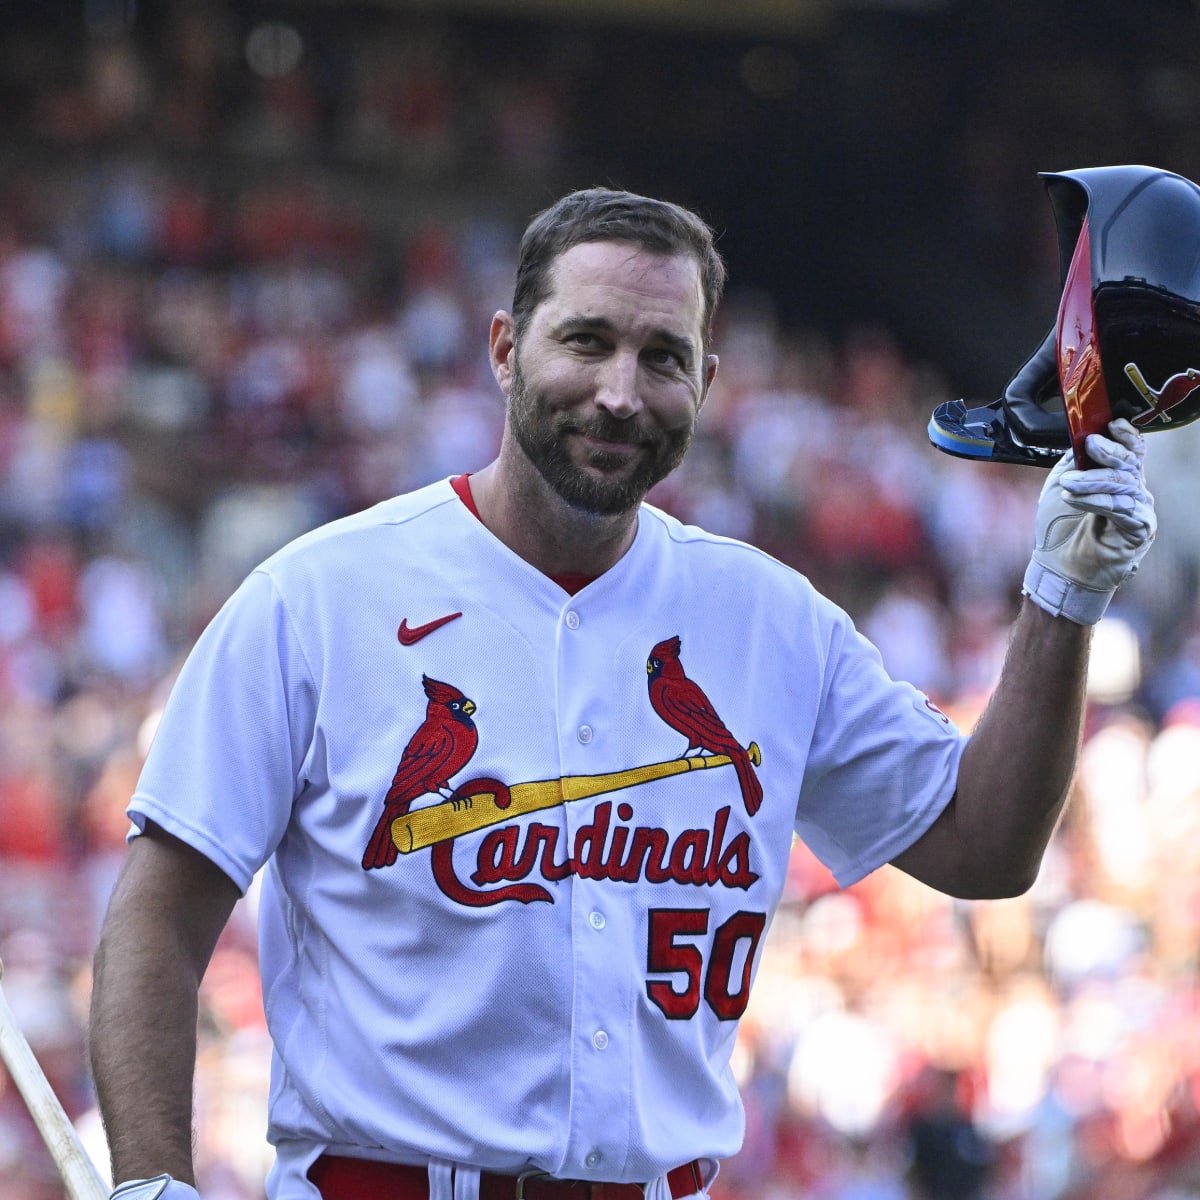 Cardinals staged awesome moment for retiring franchise legends